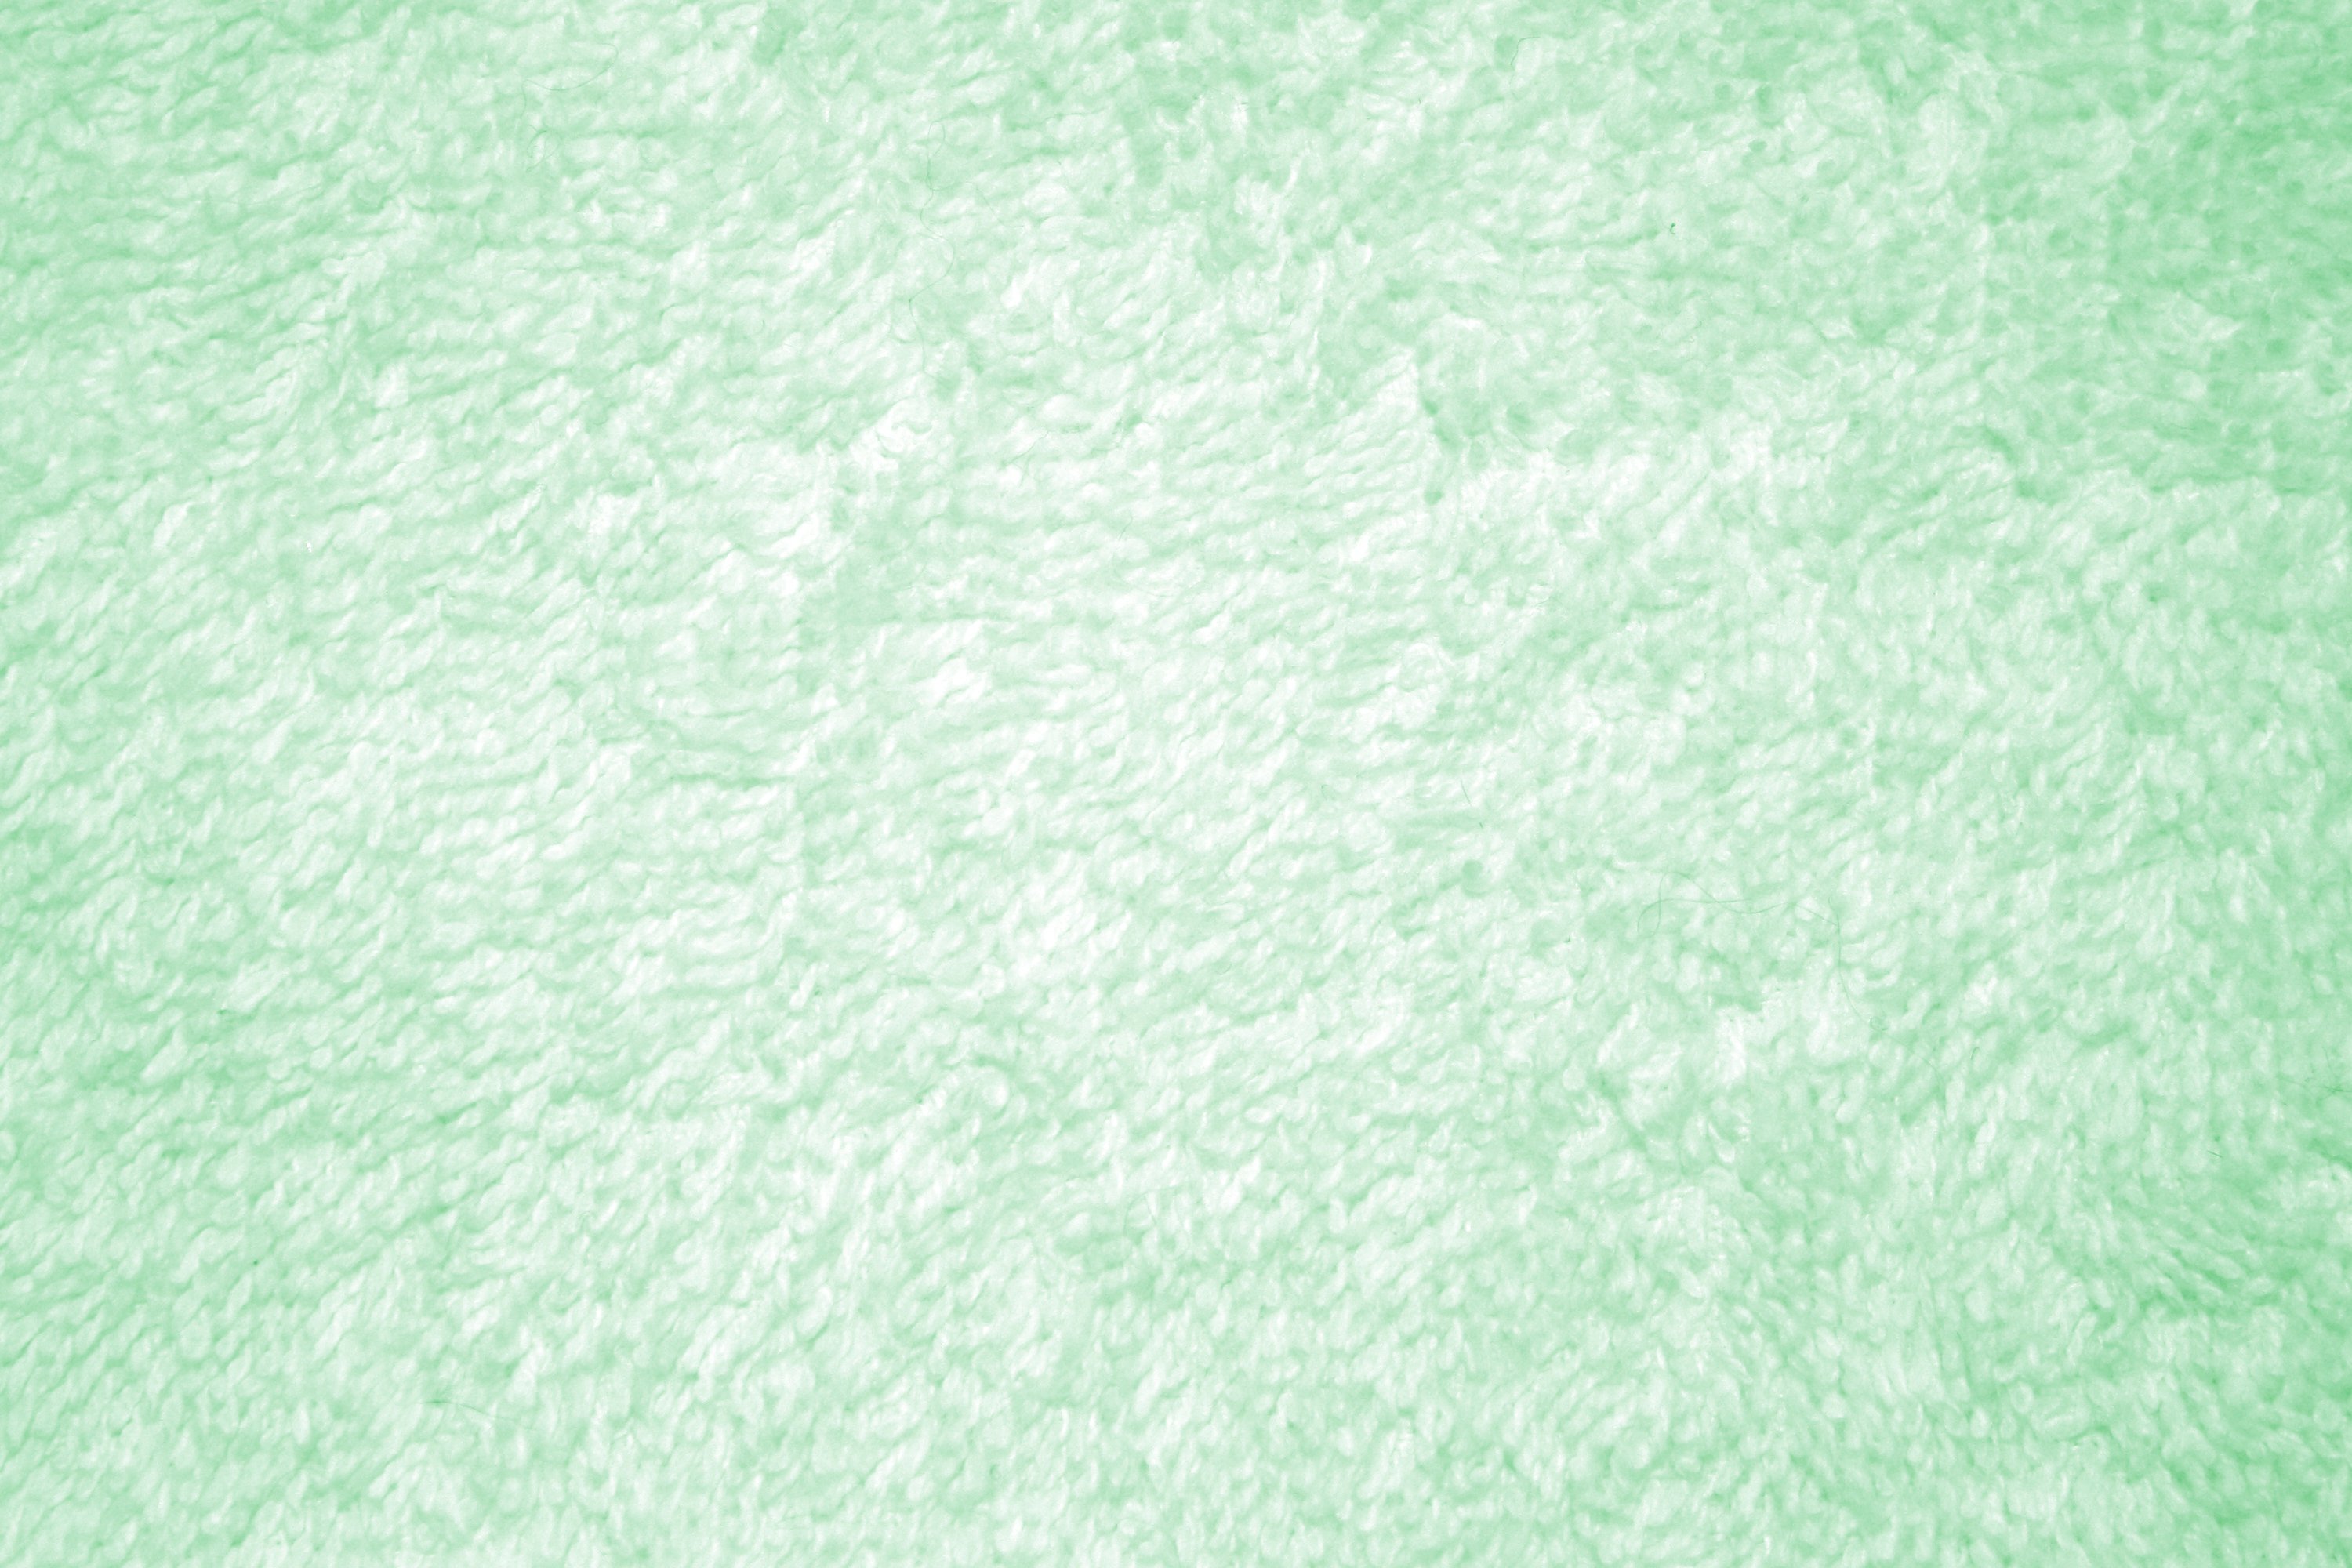 Green Terry Cloth Texture Picture Free Photograph Photos Public